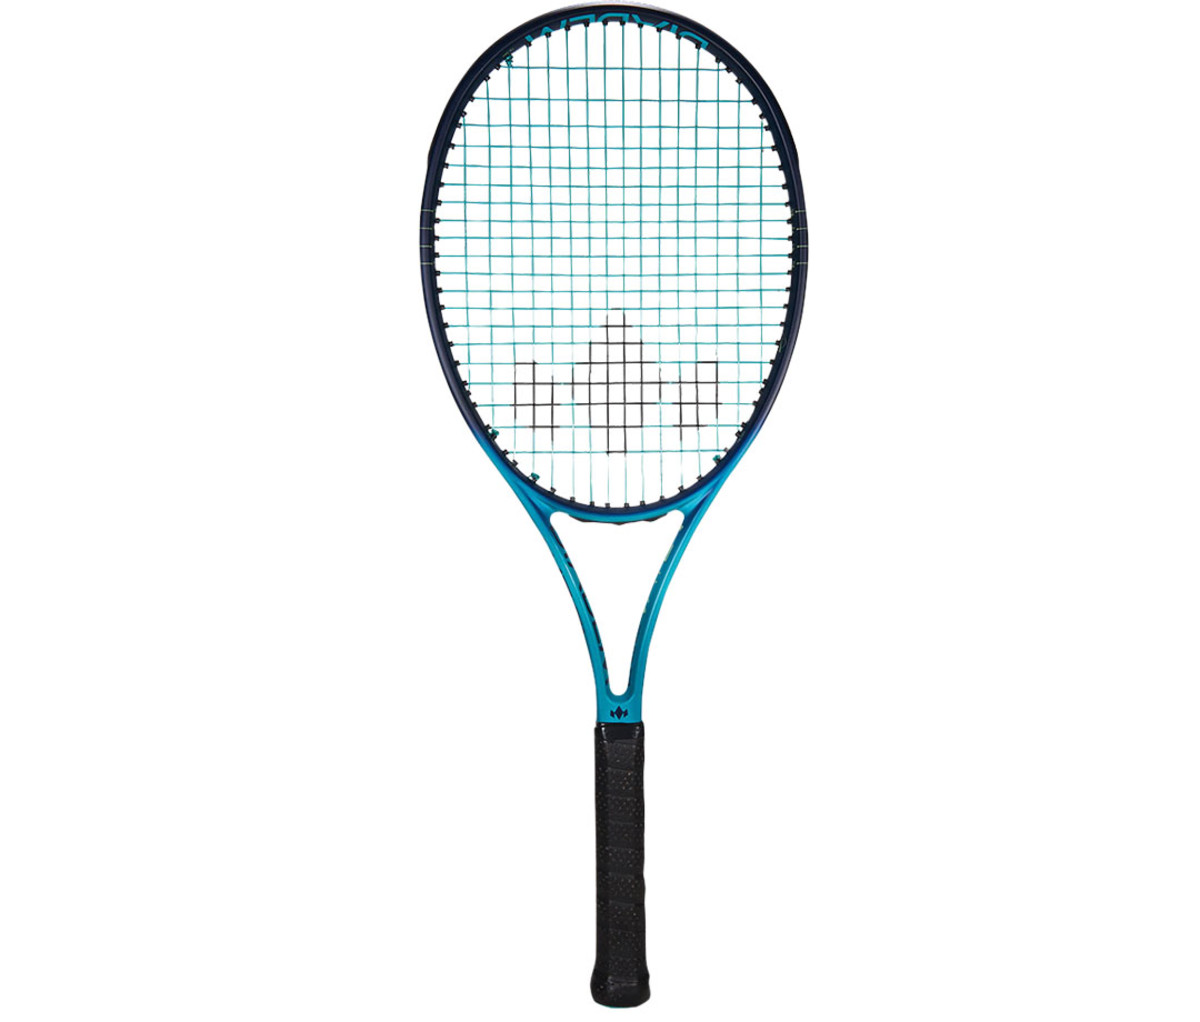 No offer refused Diadem Elevate Tennis Racquet Authorized Dealer make offer 